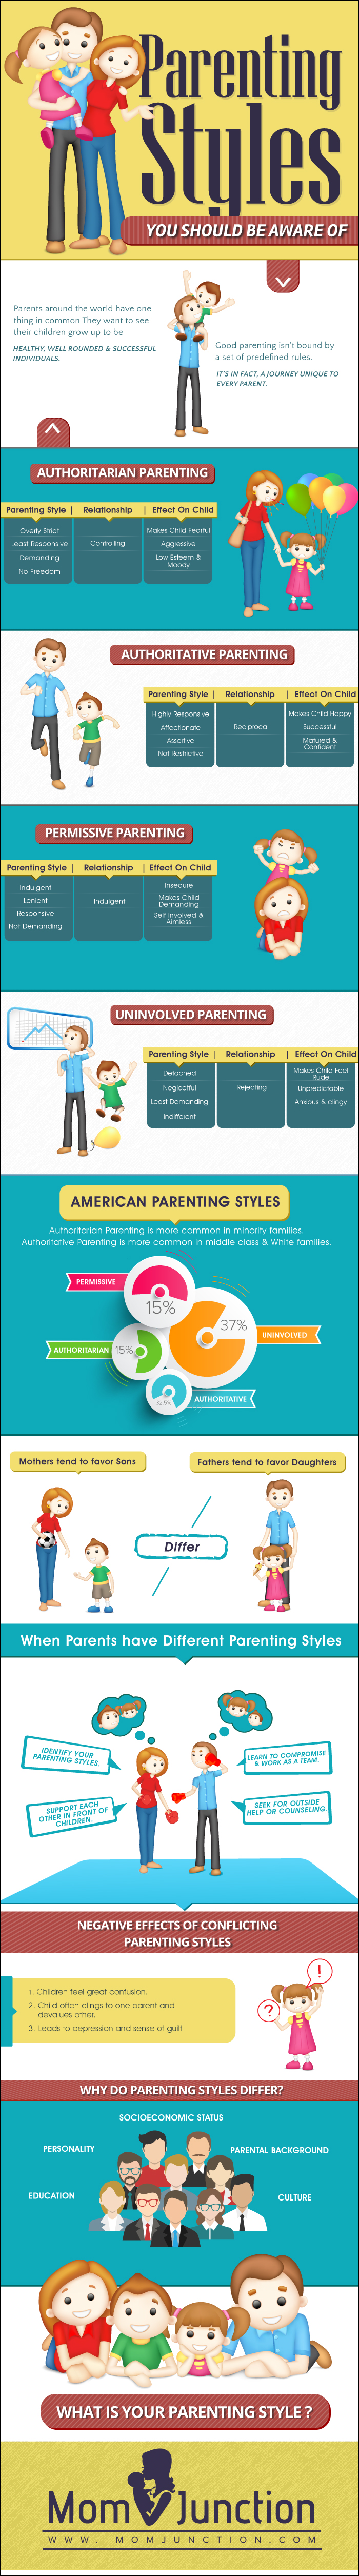 15 Parenting Styles You Should Be Aware Of